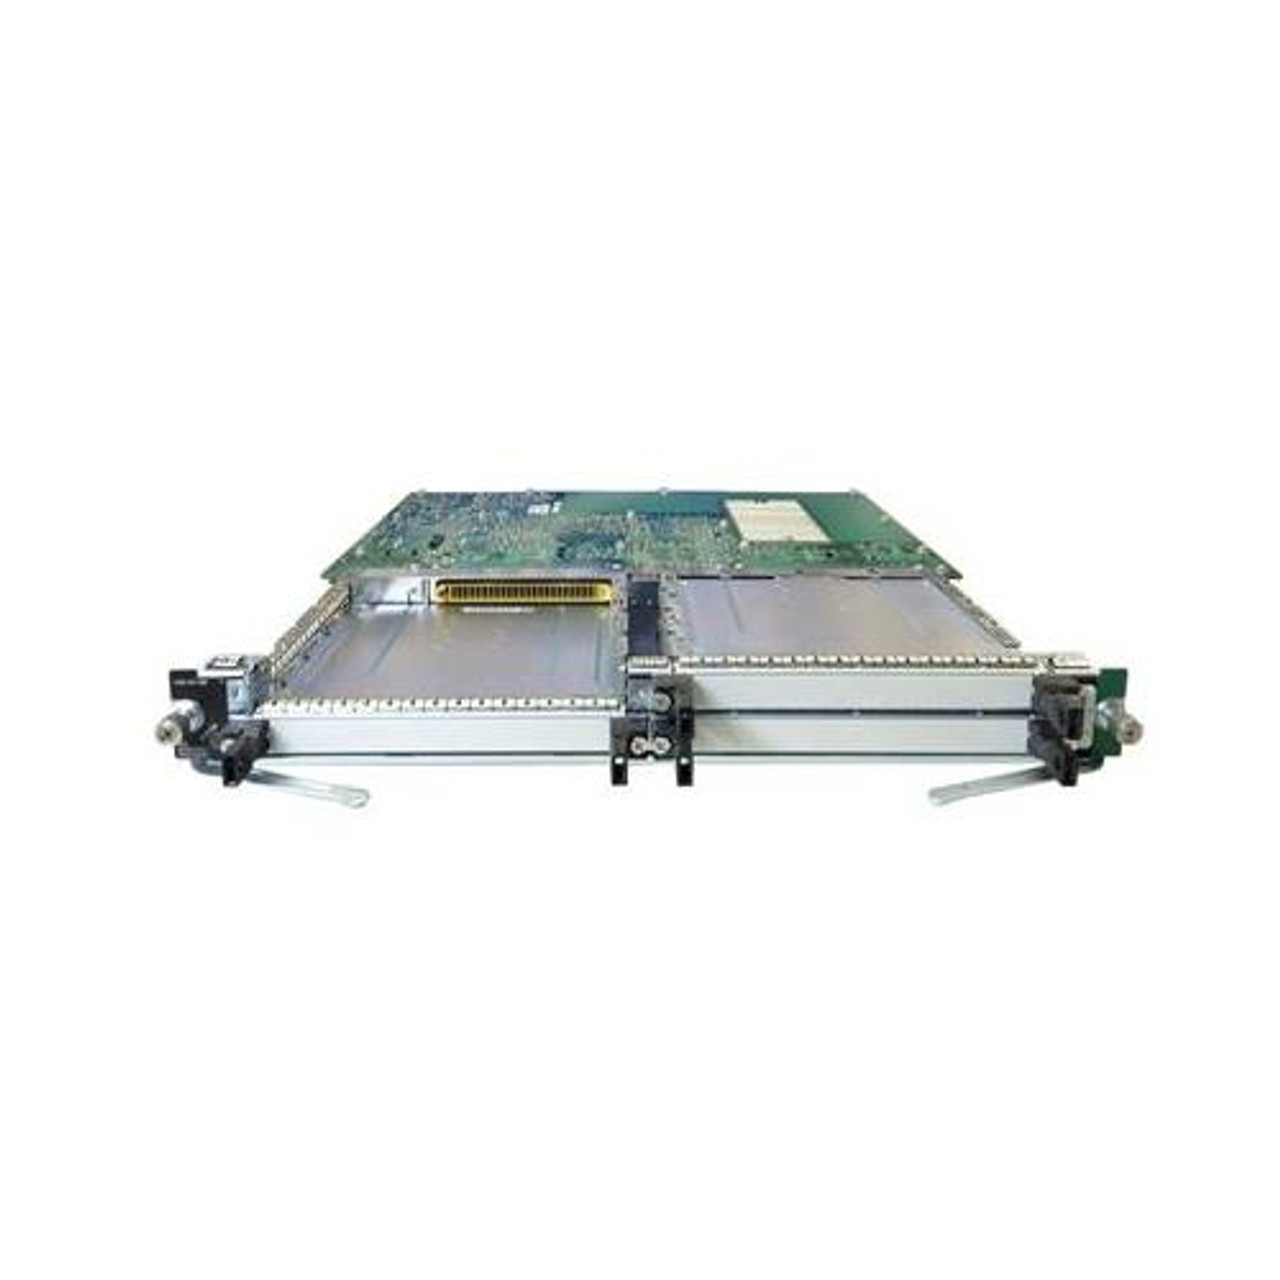 Network mounting accessories, Server equipment hardware